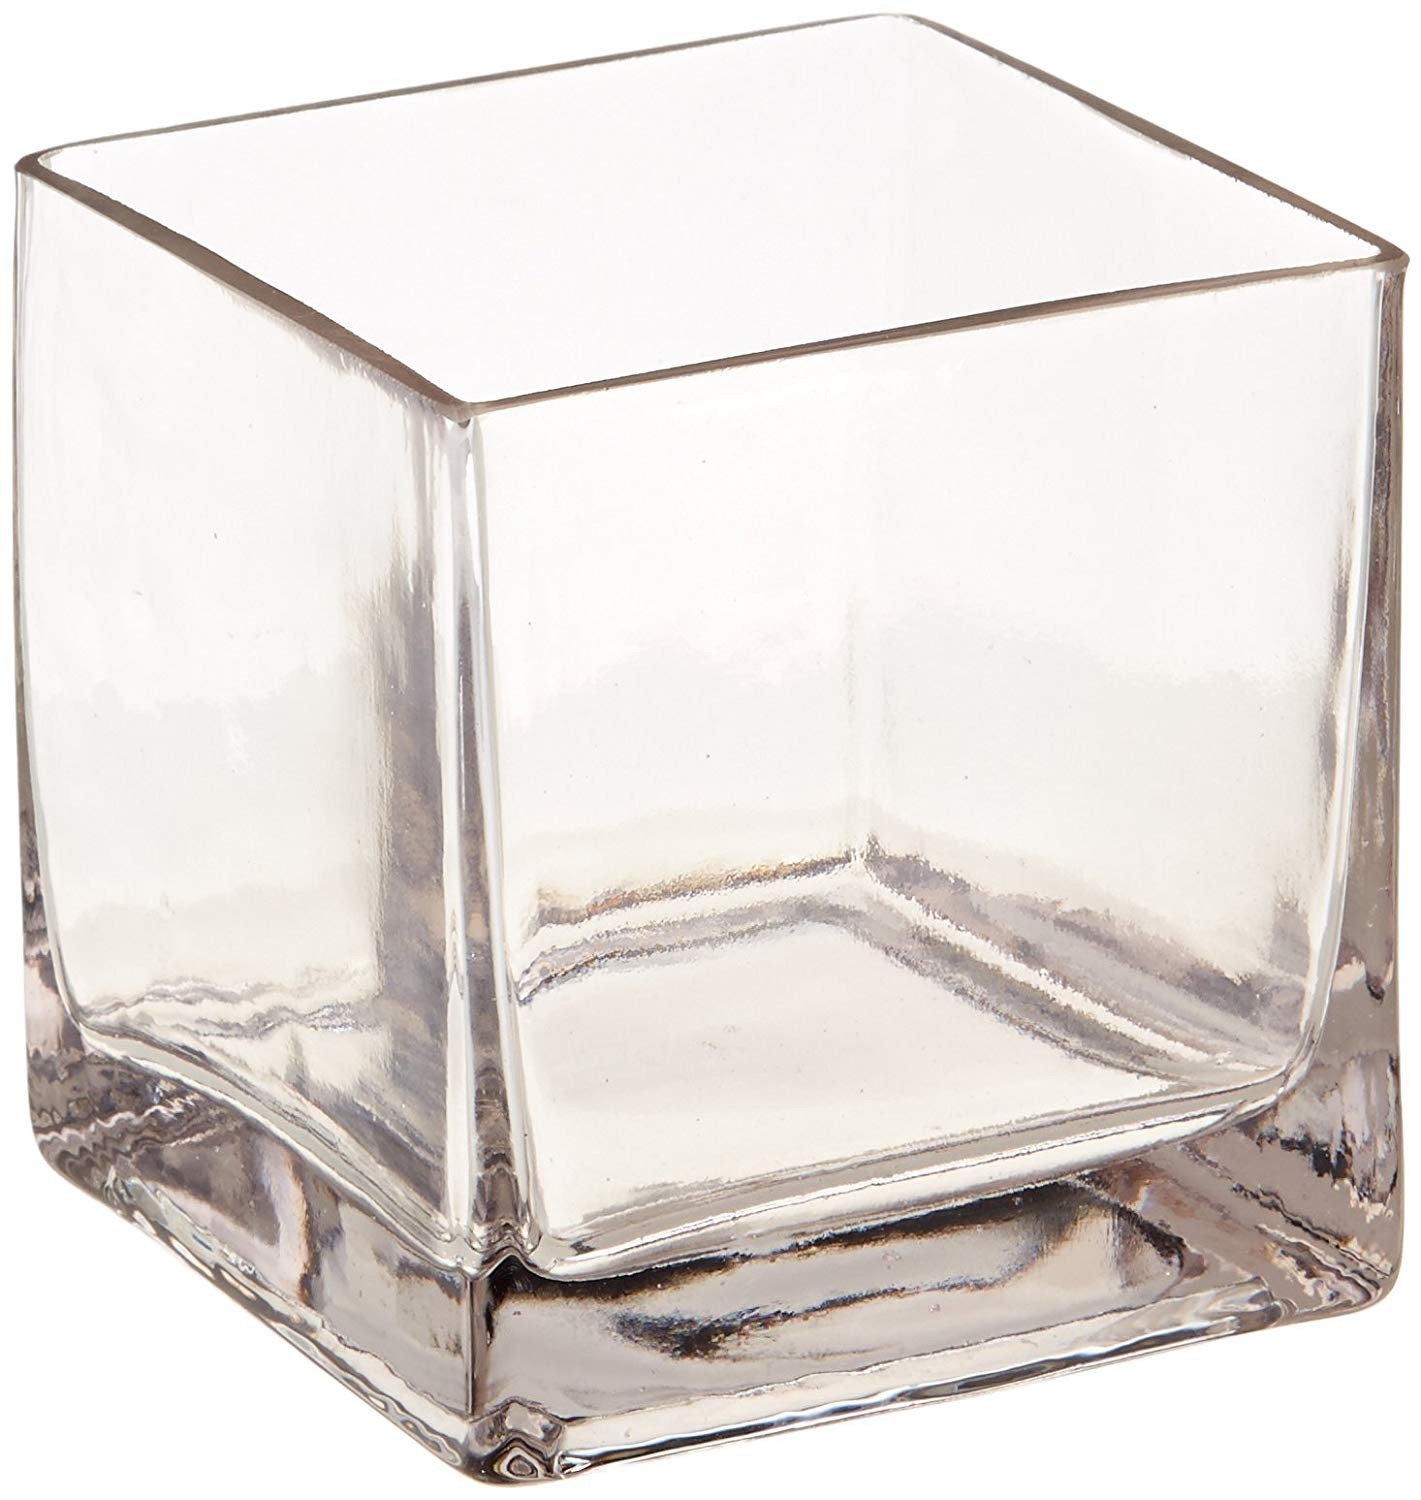 28 Awesome Large Round Clear Glass Vase 2023 free download large round clear glass vase of amazon com 12piece 4 square crystal clear glass vase home kitchen regarding 71 jezfmvnl sl1500